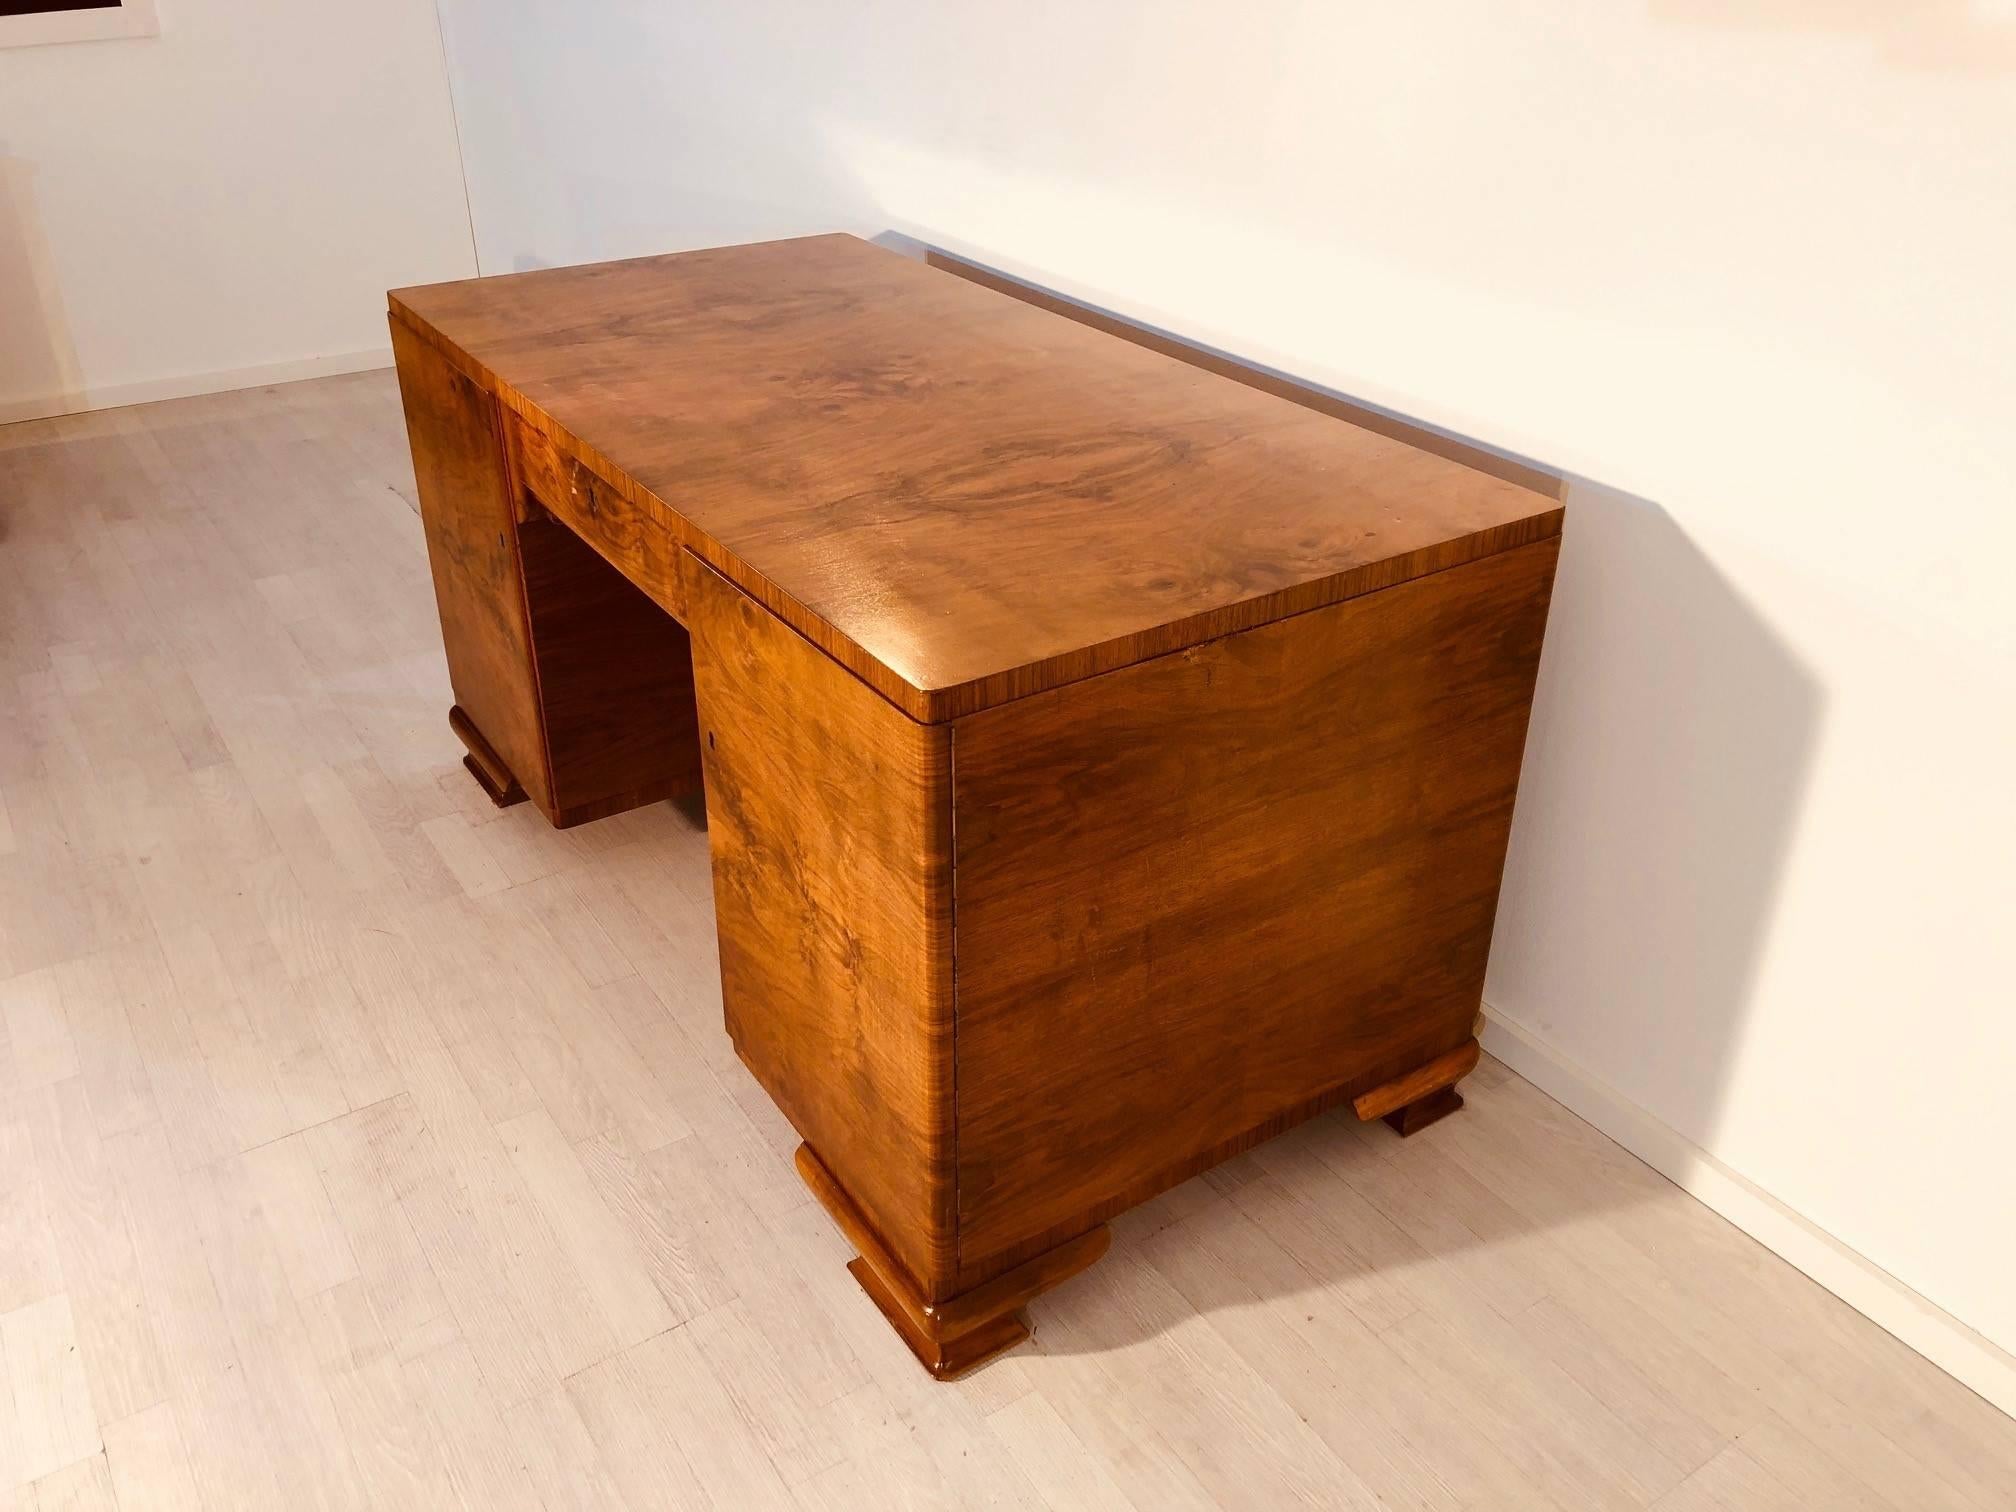 Amazing Art Deco burl desk made of wonderful walnut wood. Art Deco design meets uniquely grained wooden veneer. This French masterpiece offers storage space in fife drawers and convinces with great, high gloss polished tabletop.

 - Original French